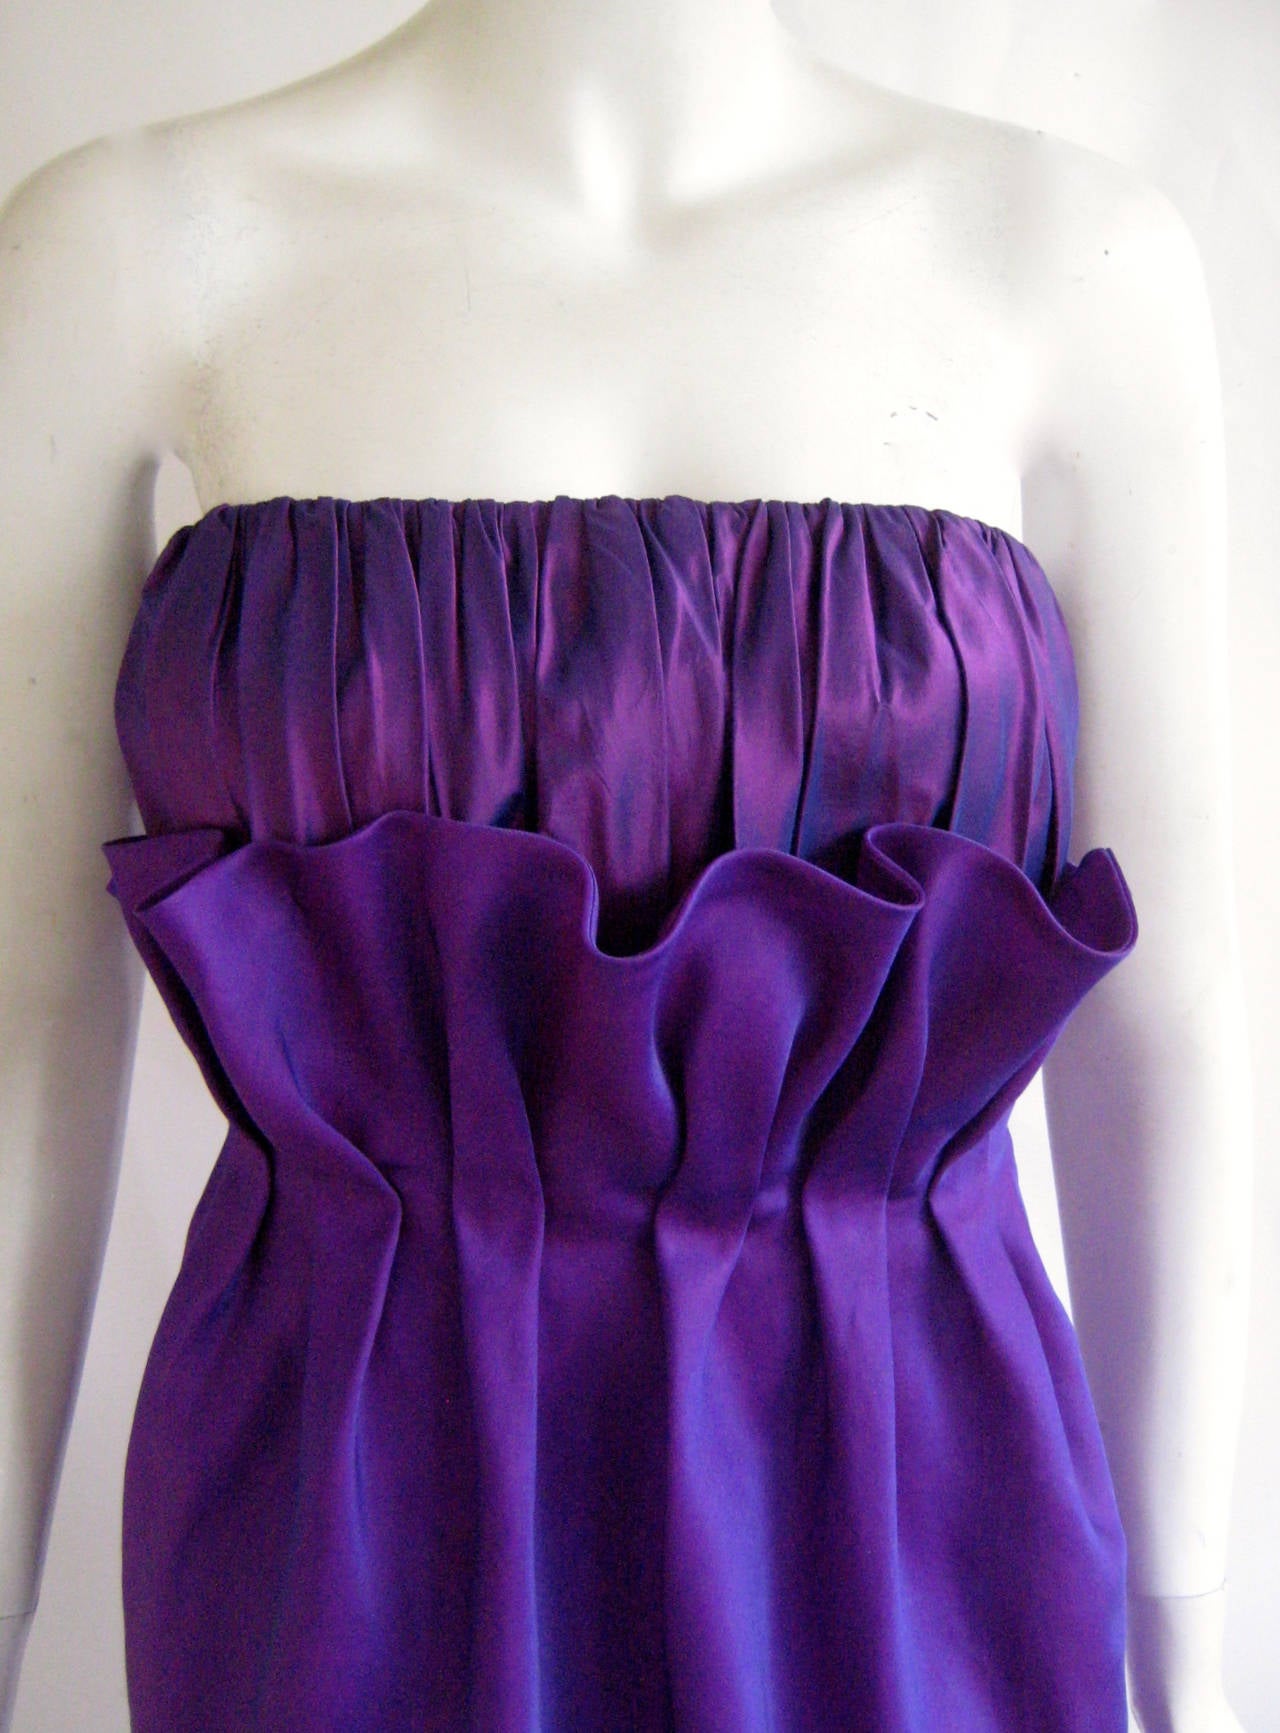 Amazing 1980s silk organza cocktail dress from fashion designer turned floral designer Carolyne Roehm.This dress looks like a flower with a finely pleated bodice and a ruffled petal overlay  .It has two zippers up one side , one that zips all the